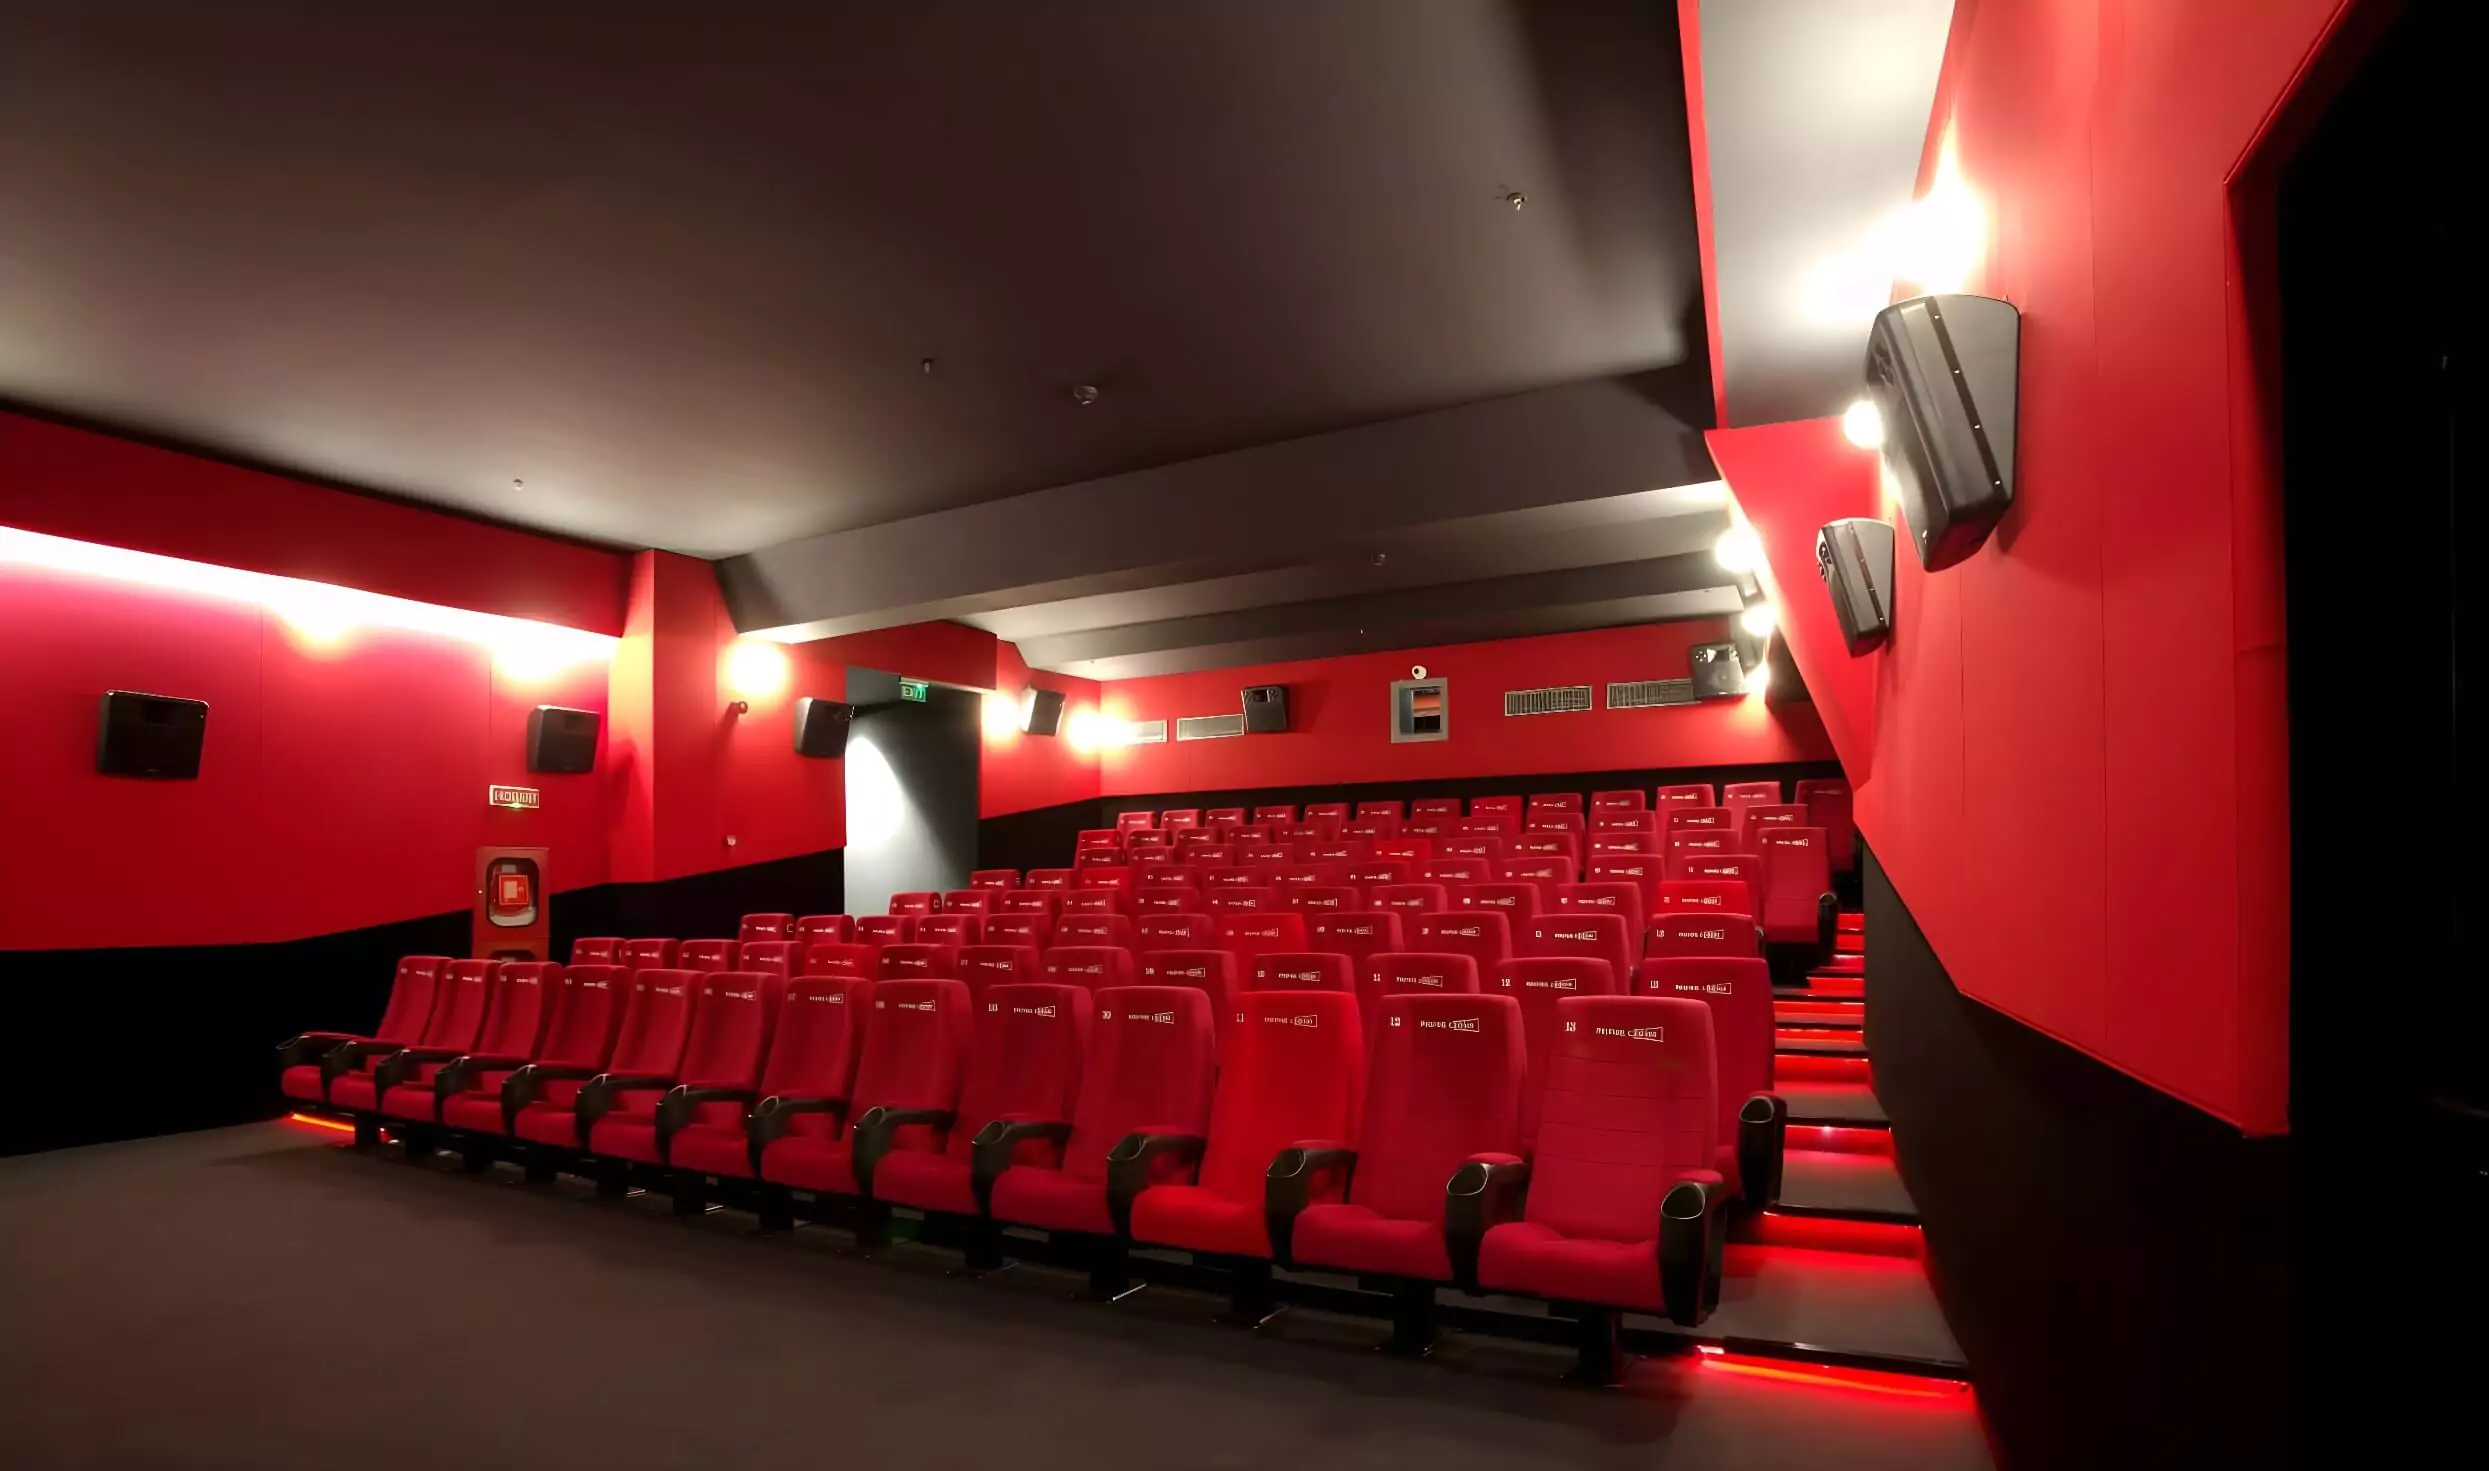 Cinema Seating Project - Monseat